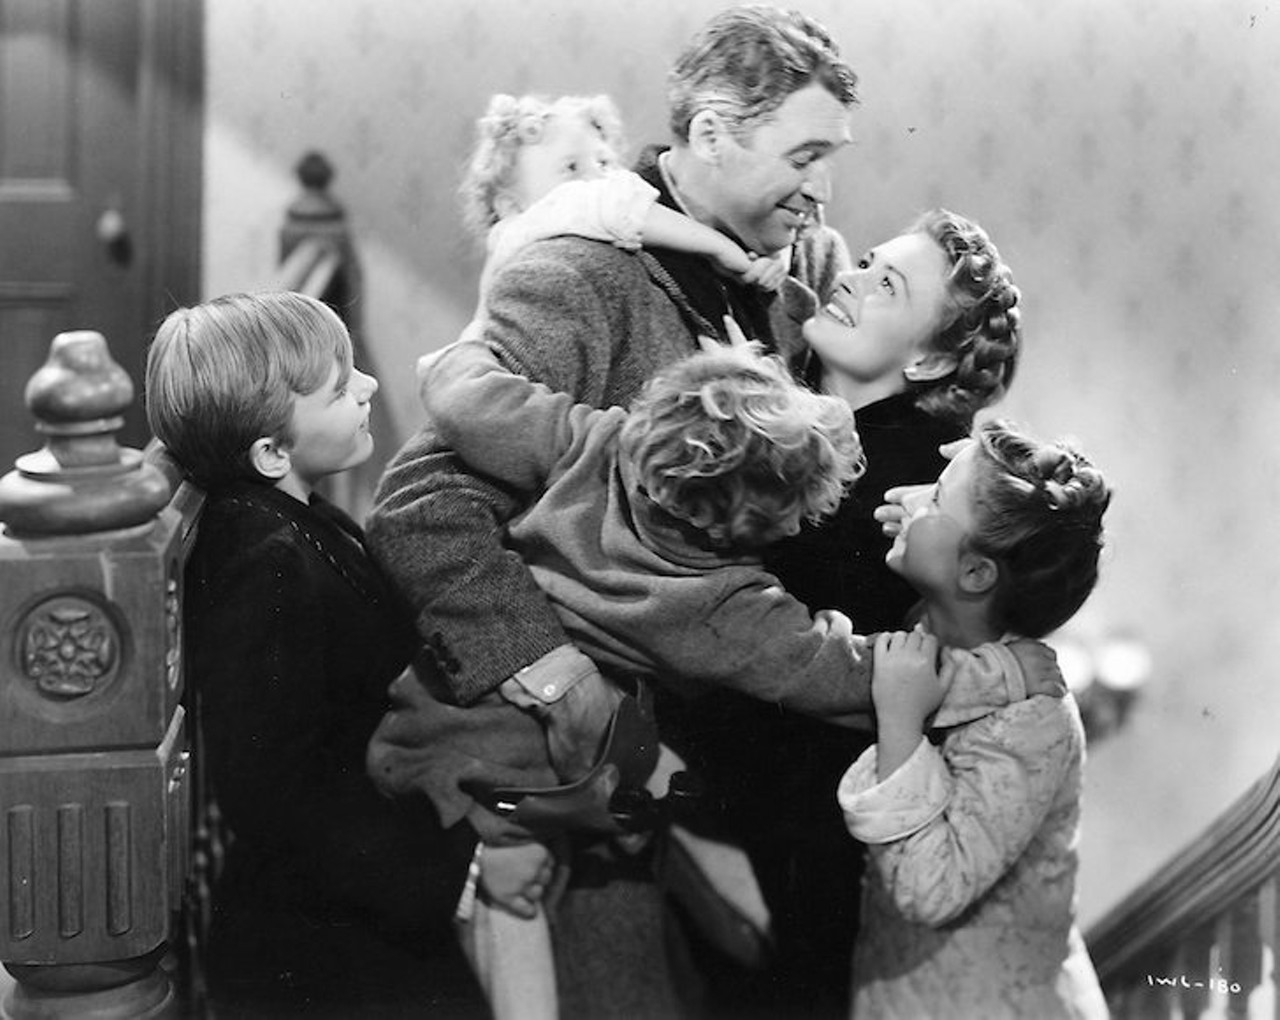 Saturday Matinee Classics: It's a Wonderful Life 
Dec. 8
Film about a man's life and what would have happened had he never been born. Noon; Enzian Theater, 1300 S. Orlando Ave., Maitland; $9. enzian.org.
Photo via Enzian Theatre/Facebook